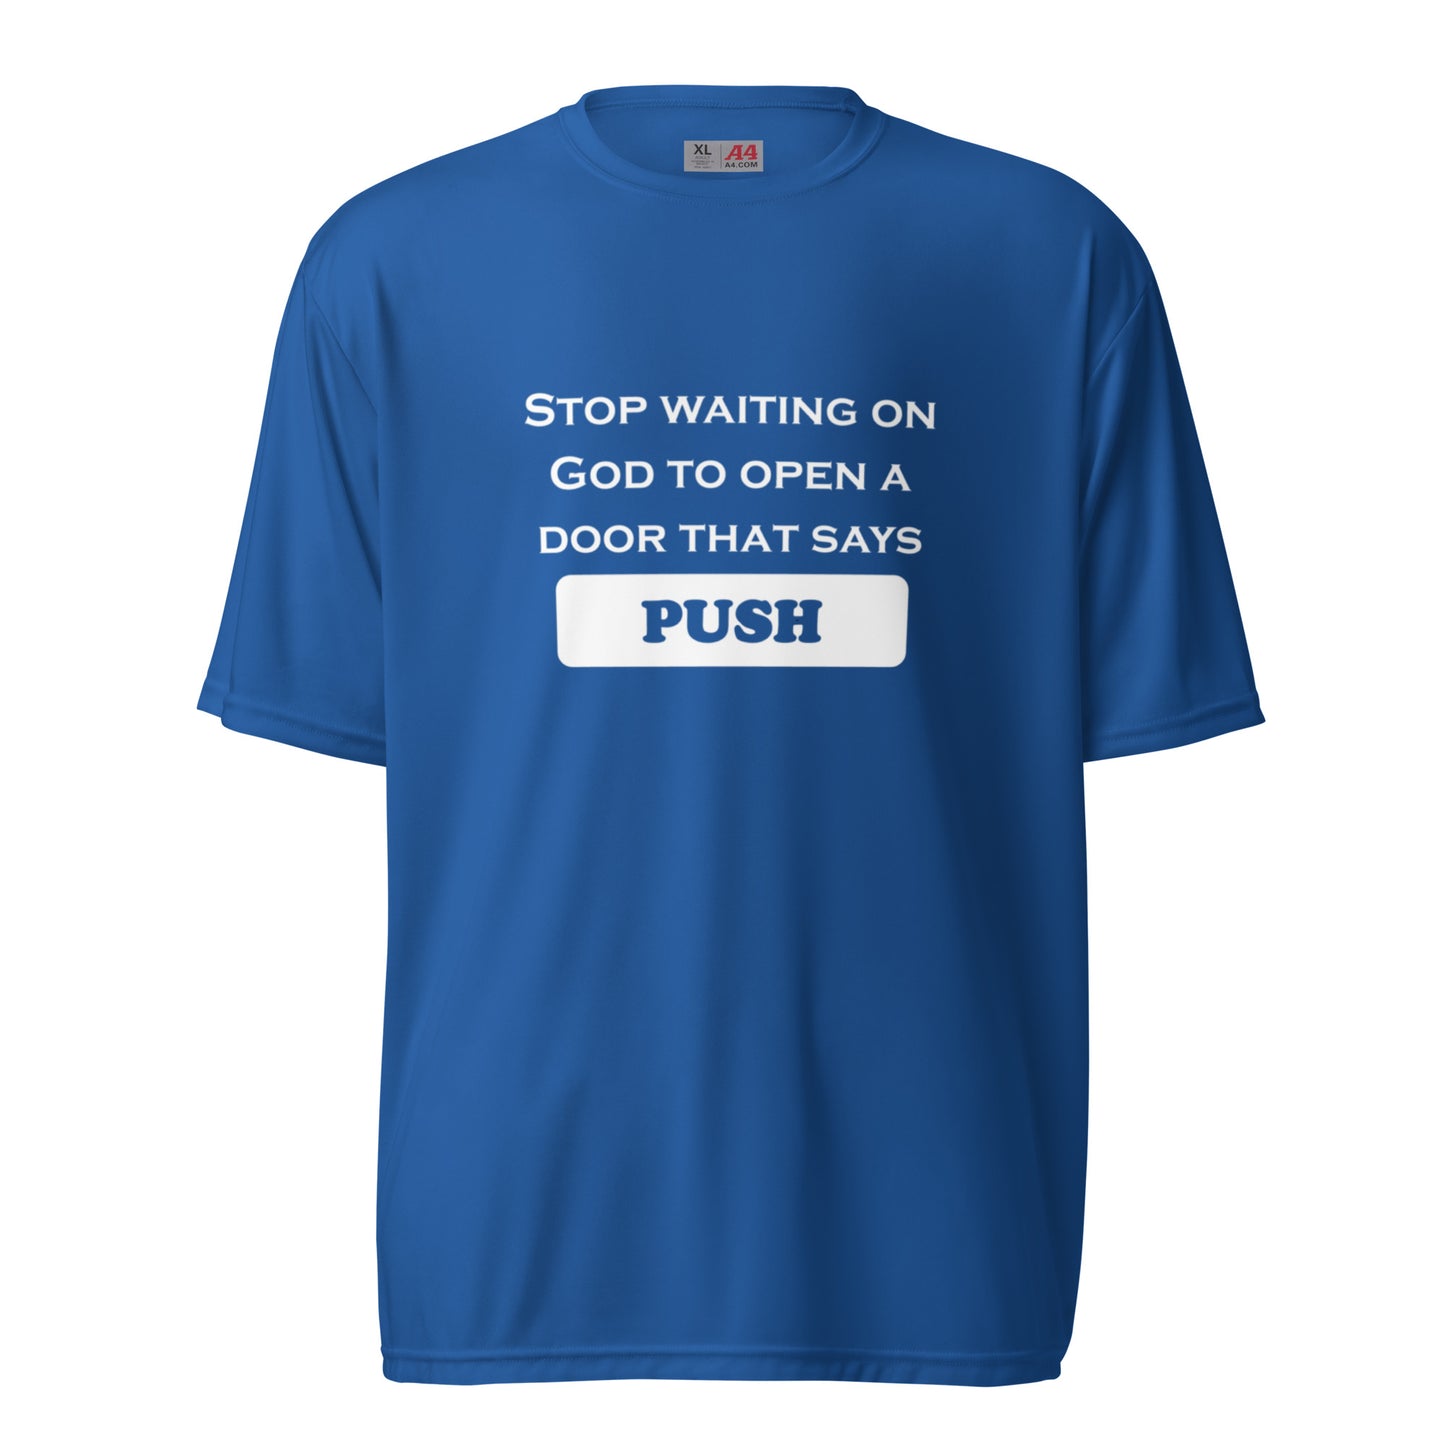 Stop Waiting on God to Open a Door unisex performance crew neck t-shirt - White Print